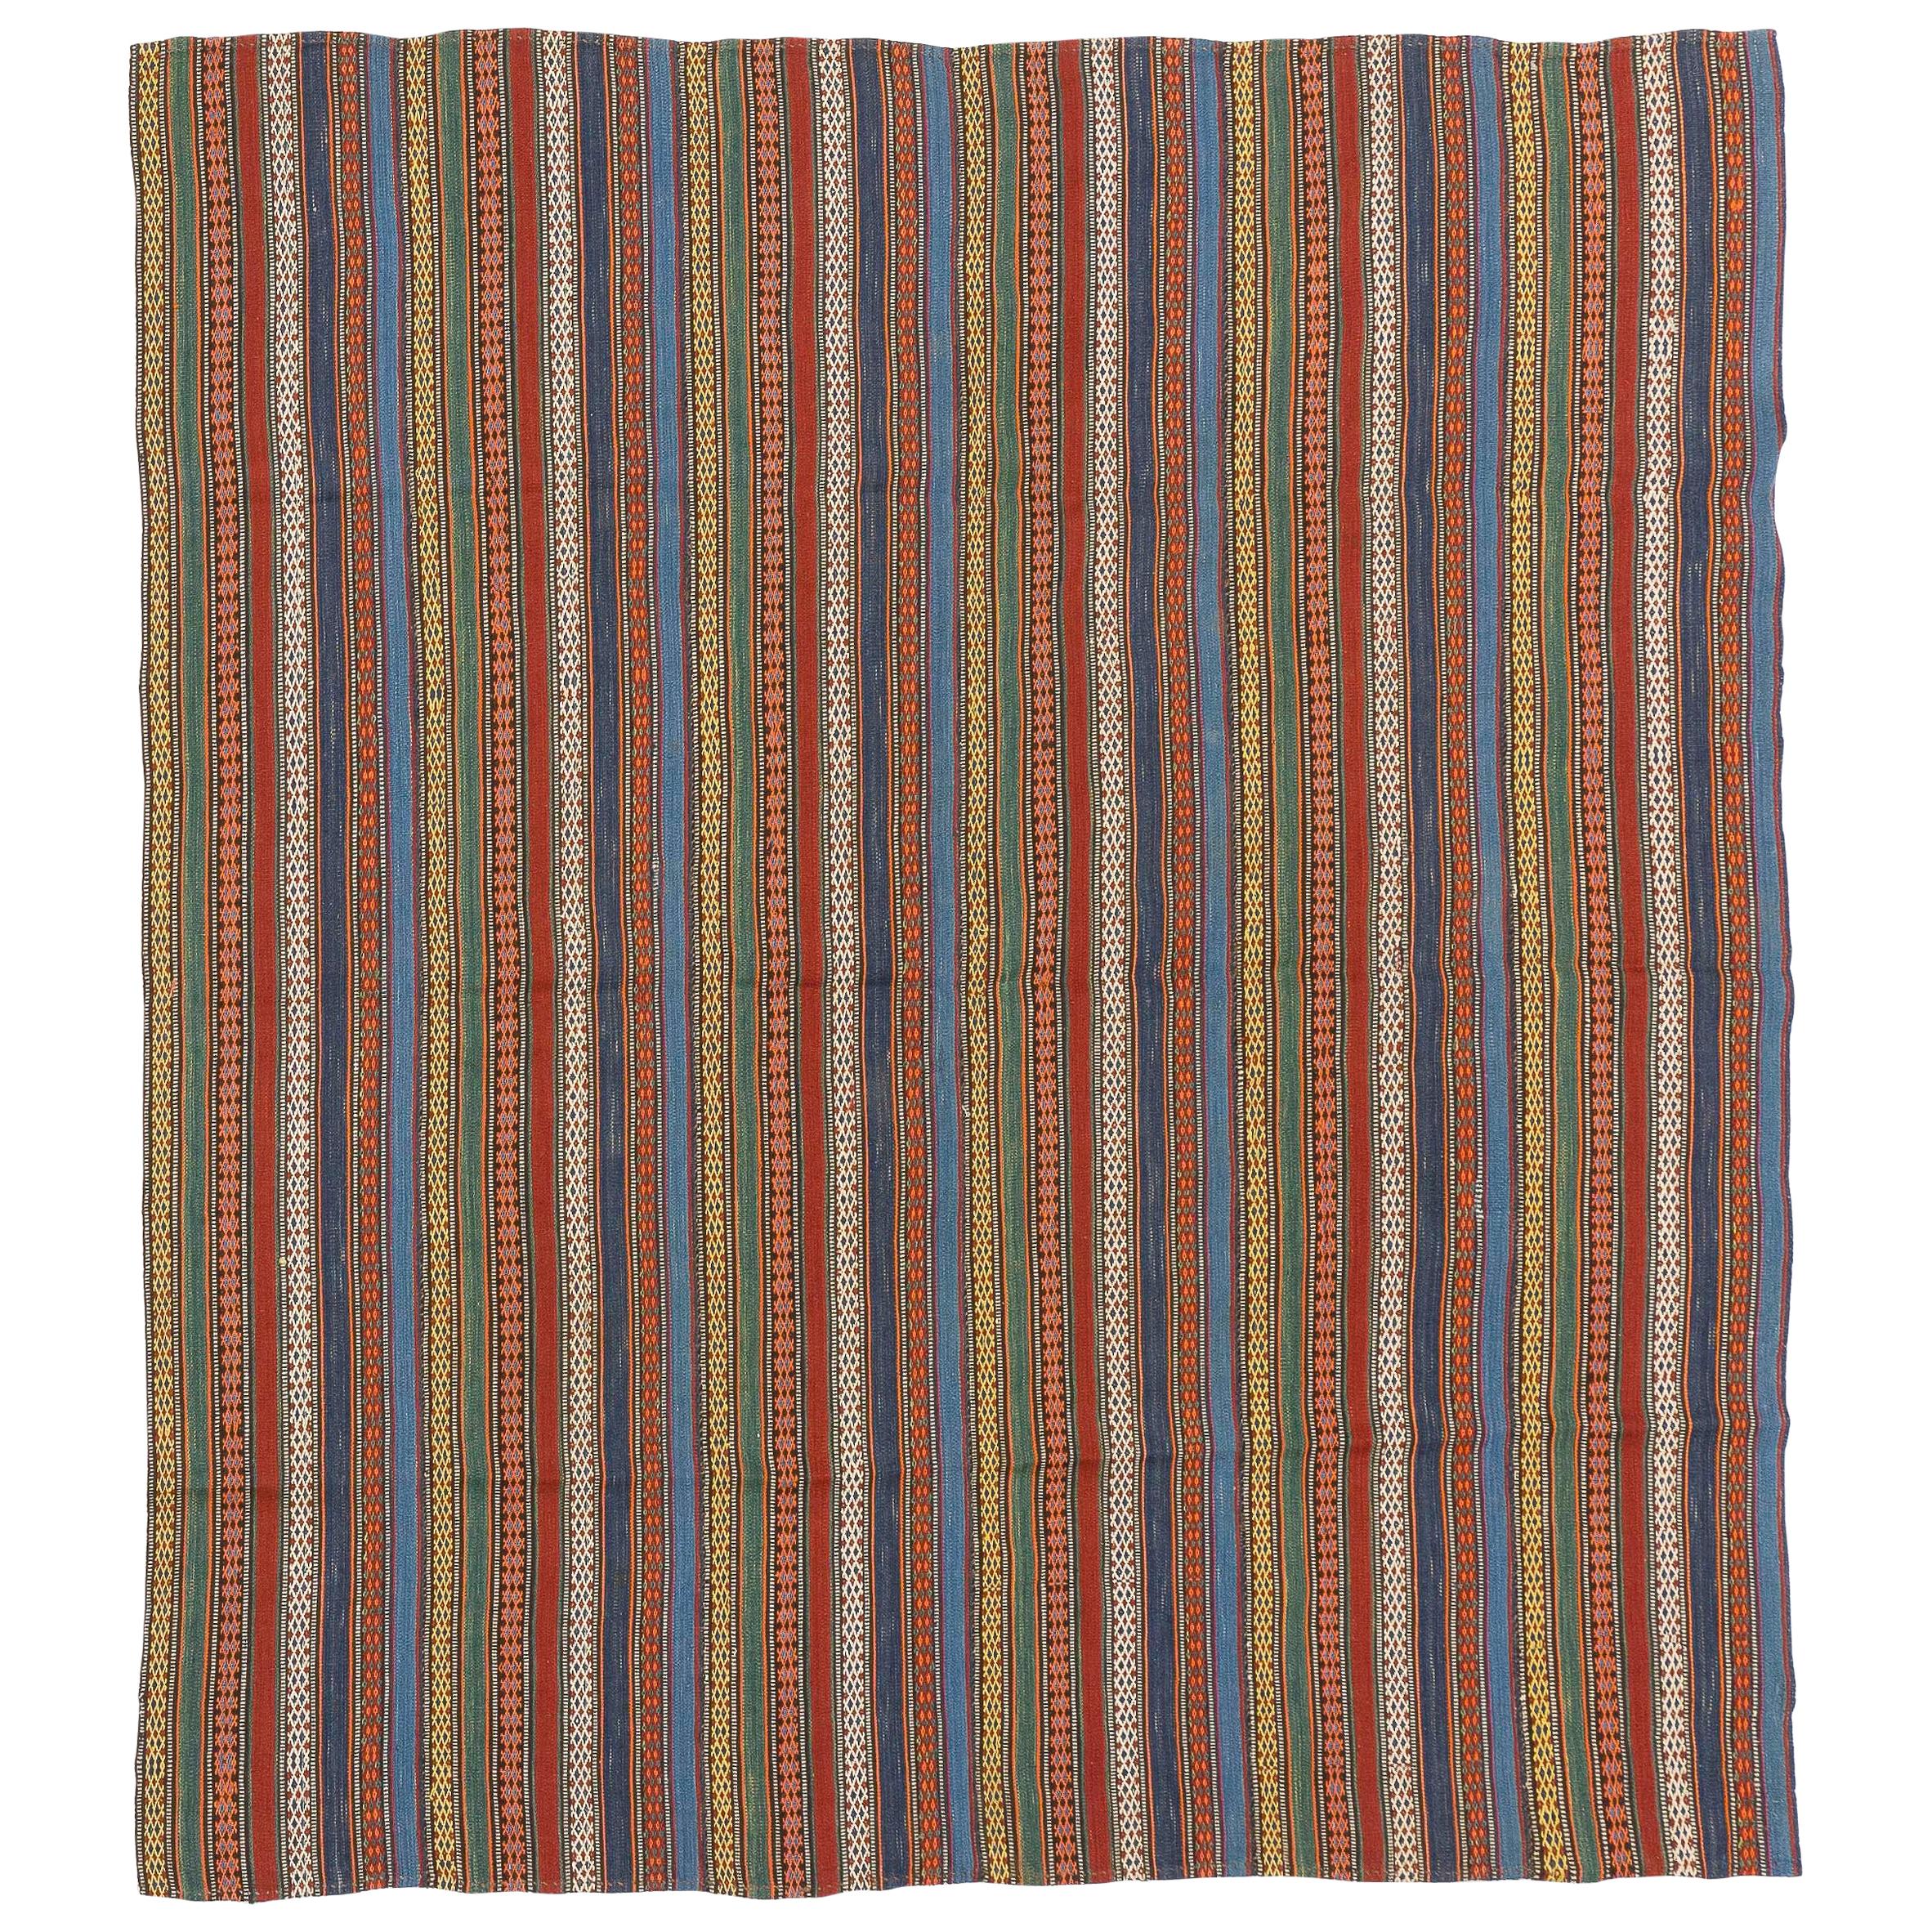 Antique Persian Jajim Flat-Weave Rug with Colored Stripes and Tribal Details